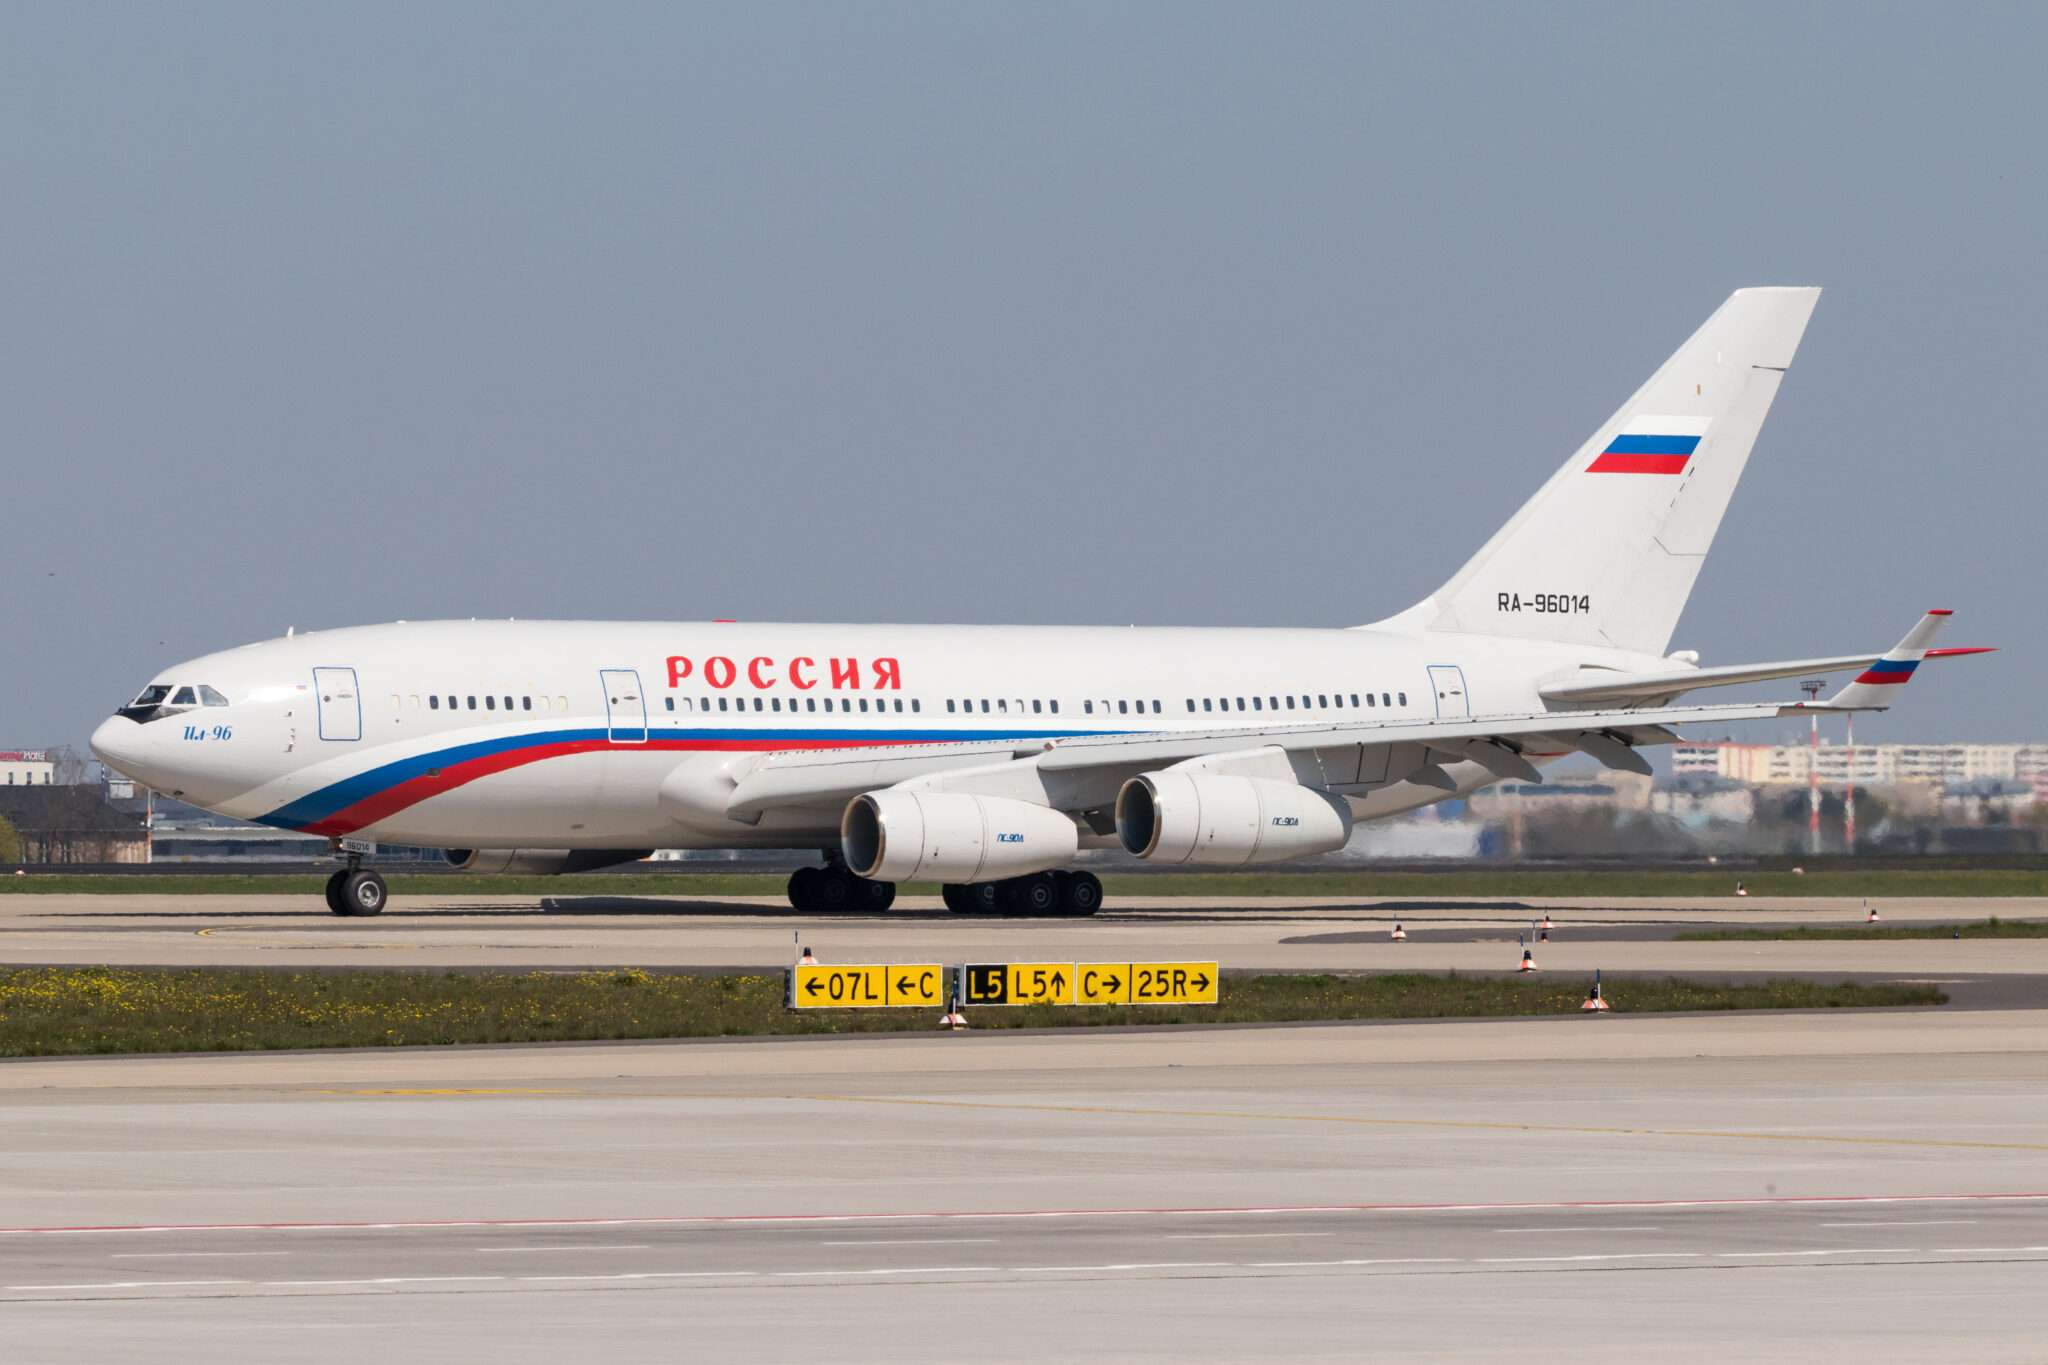 LIVE: Russian Aircraft To Depart New York for Moscow